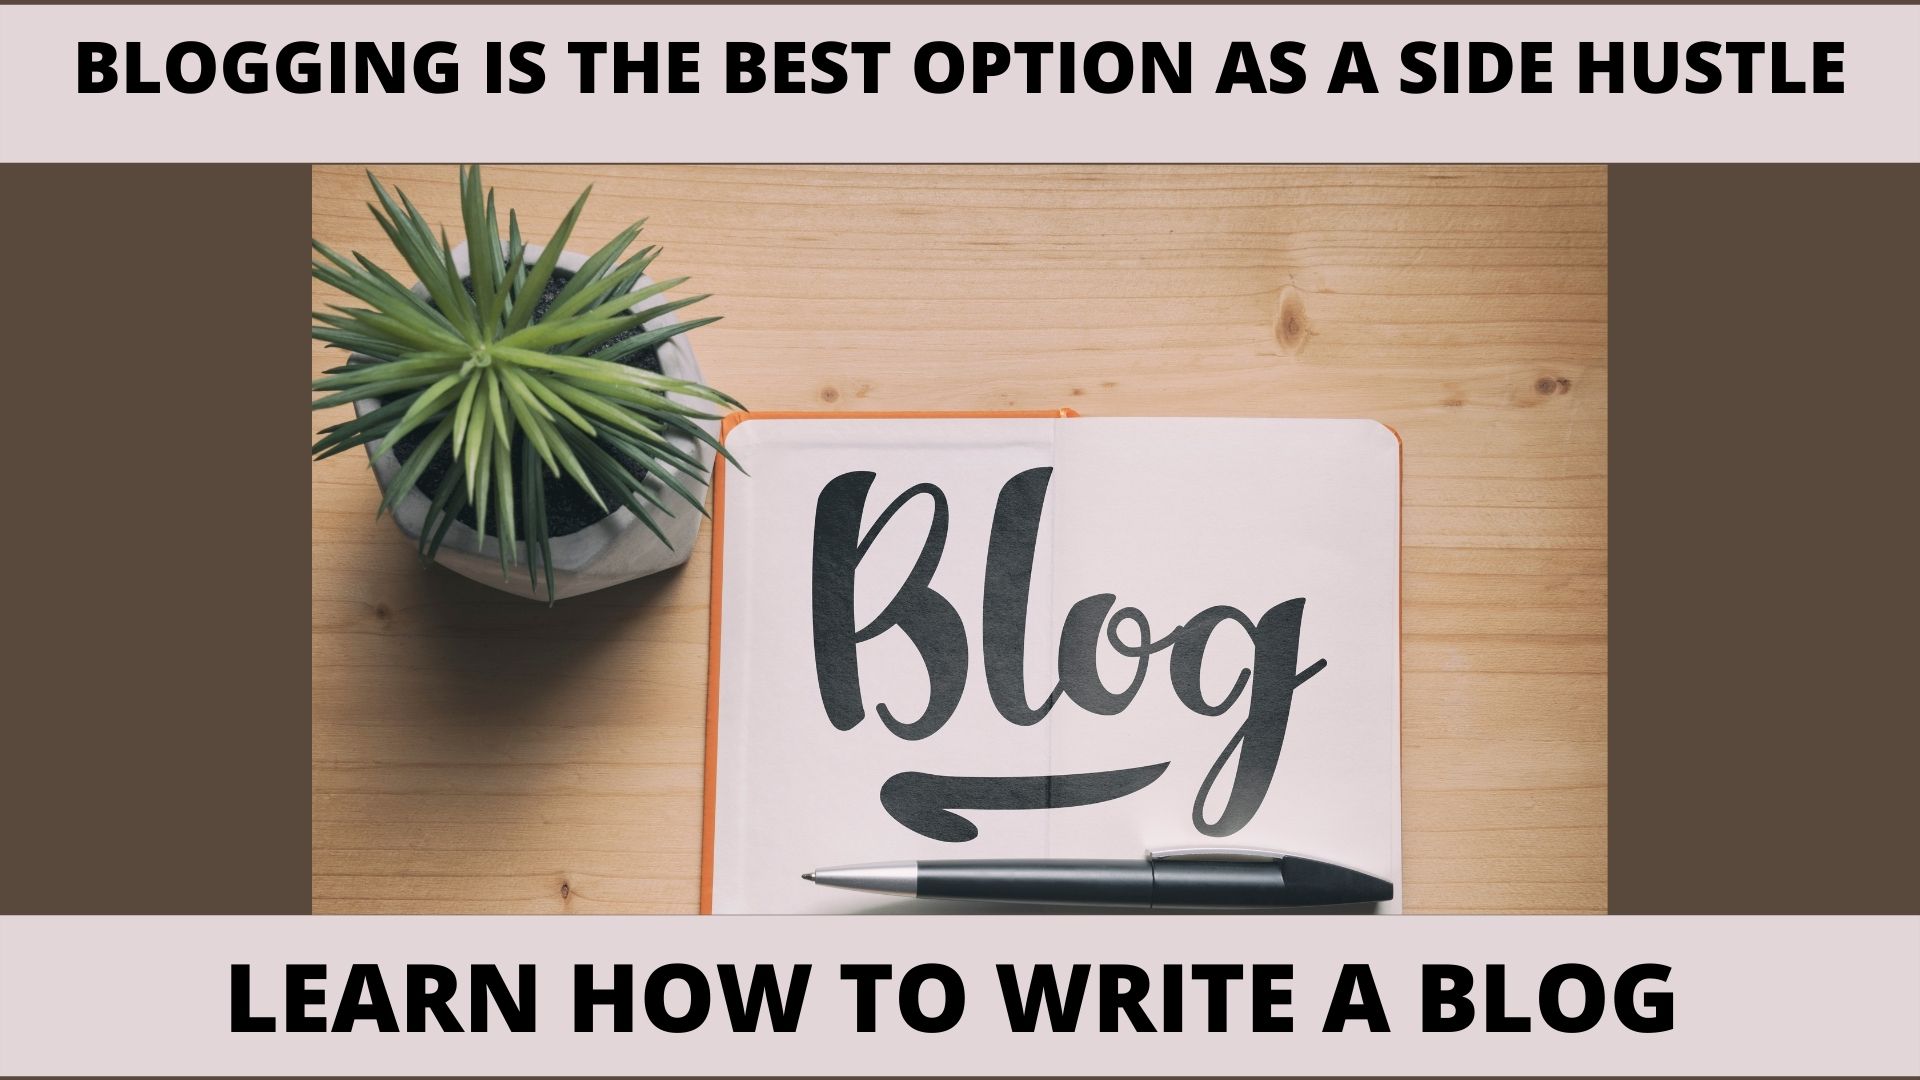 Blogging Is The Best Option As A Side Hustle! Learn How to Write a Blog